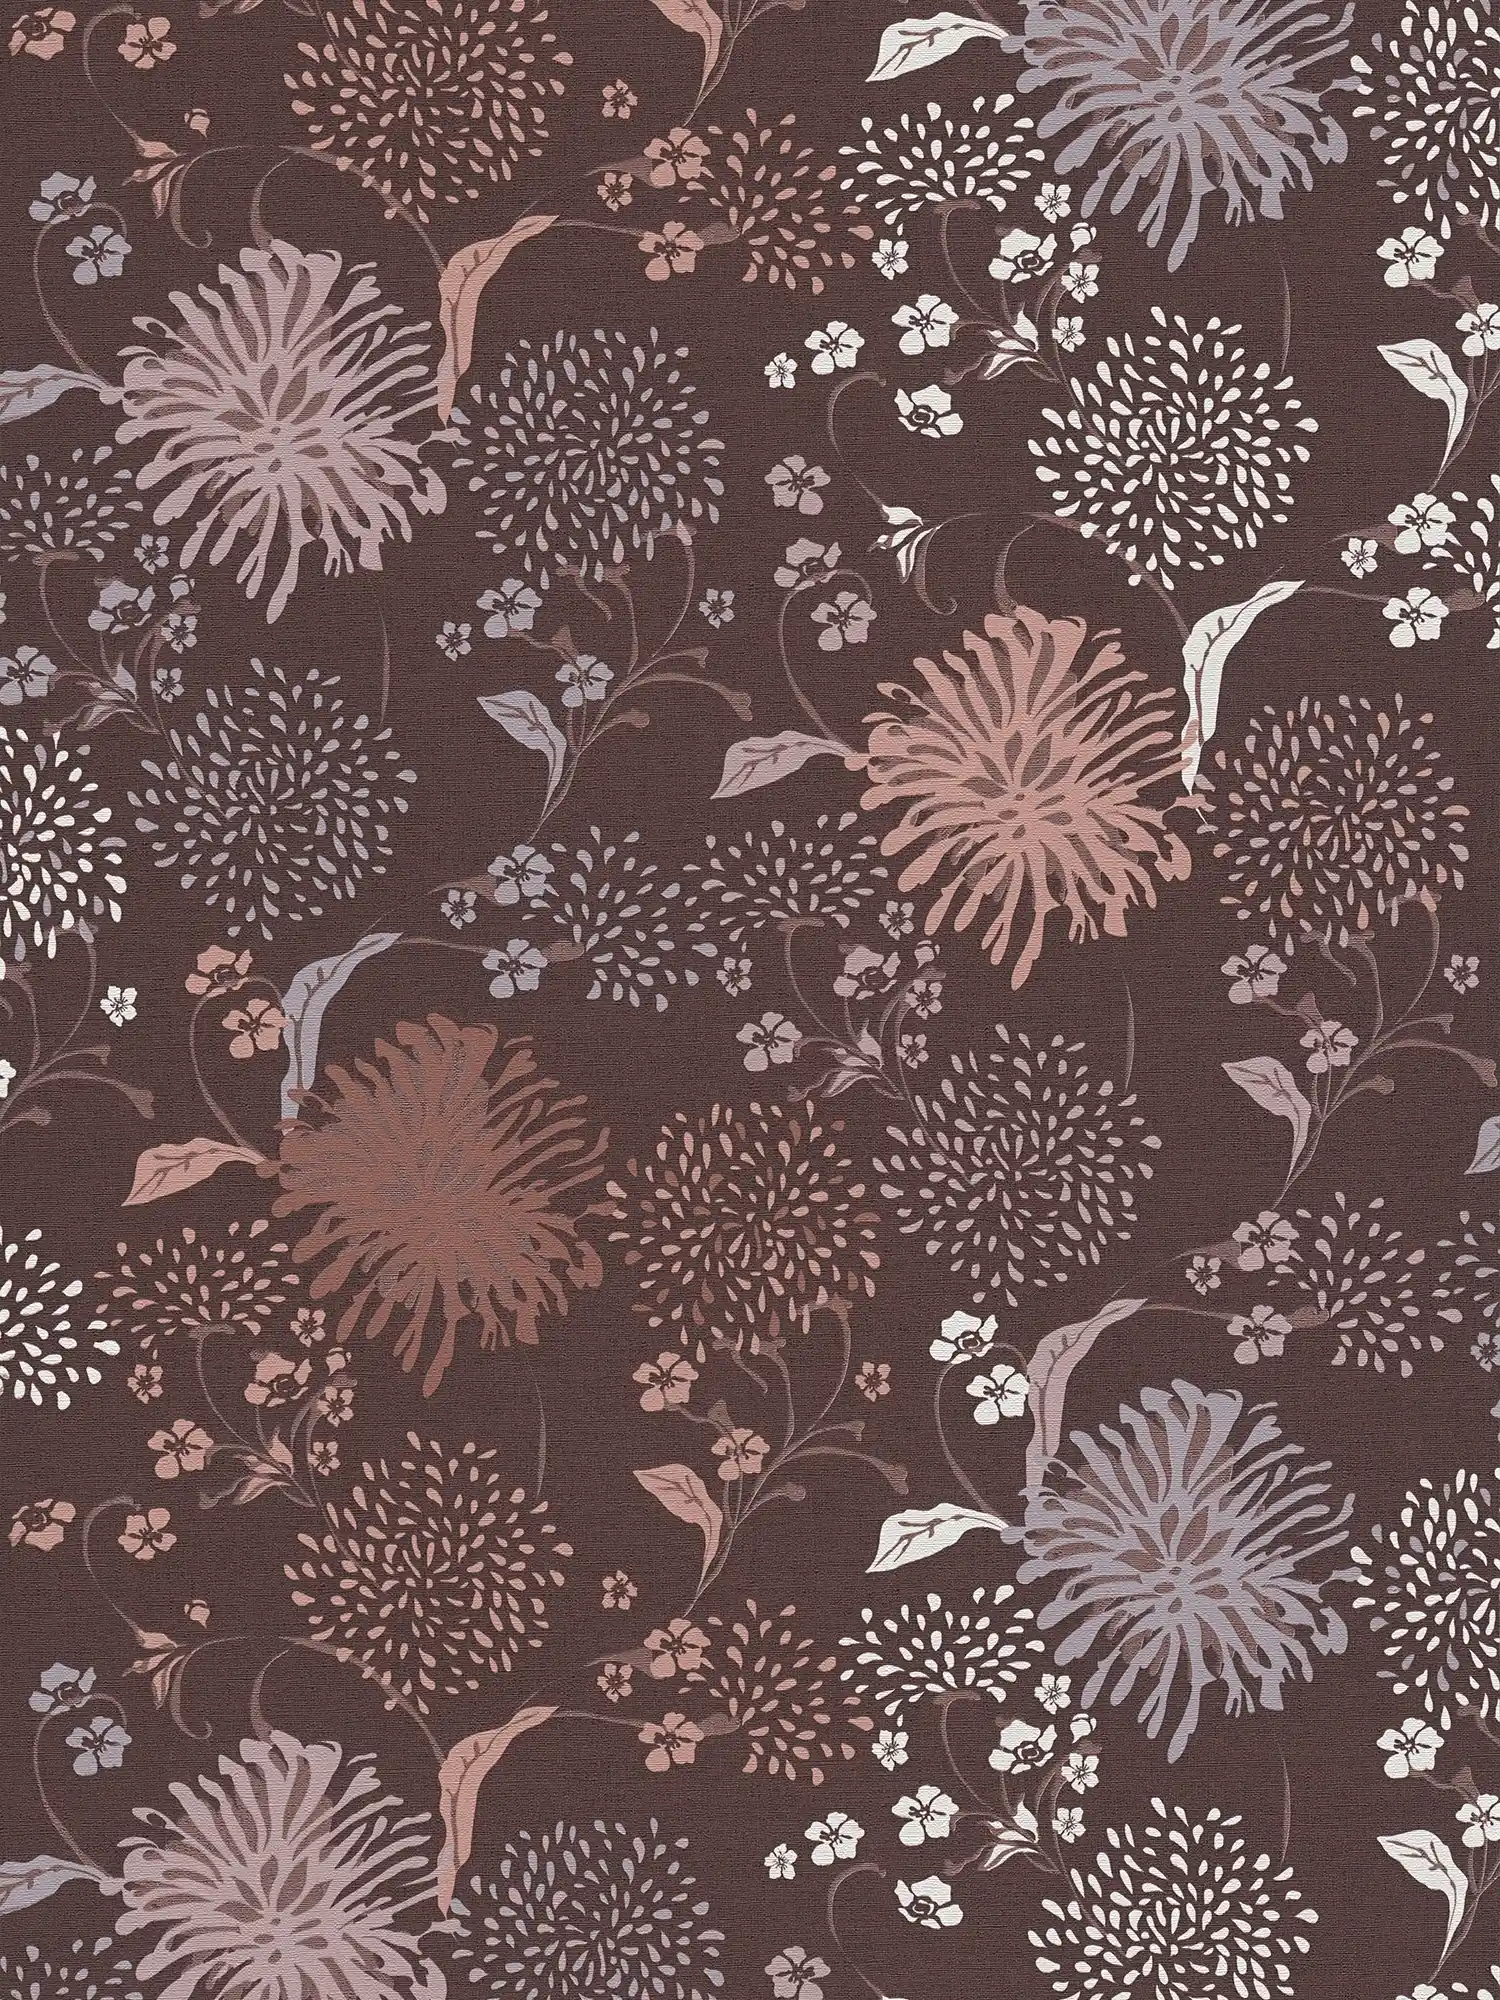 Floral wallpaper with playful pattern & linen look - wine red, grey, white
